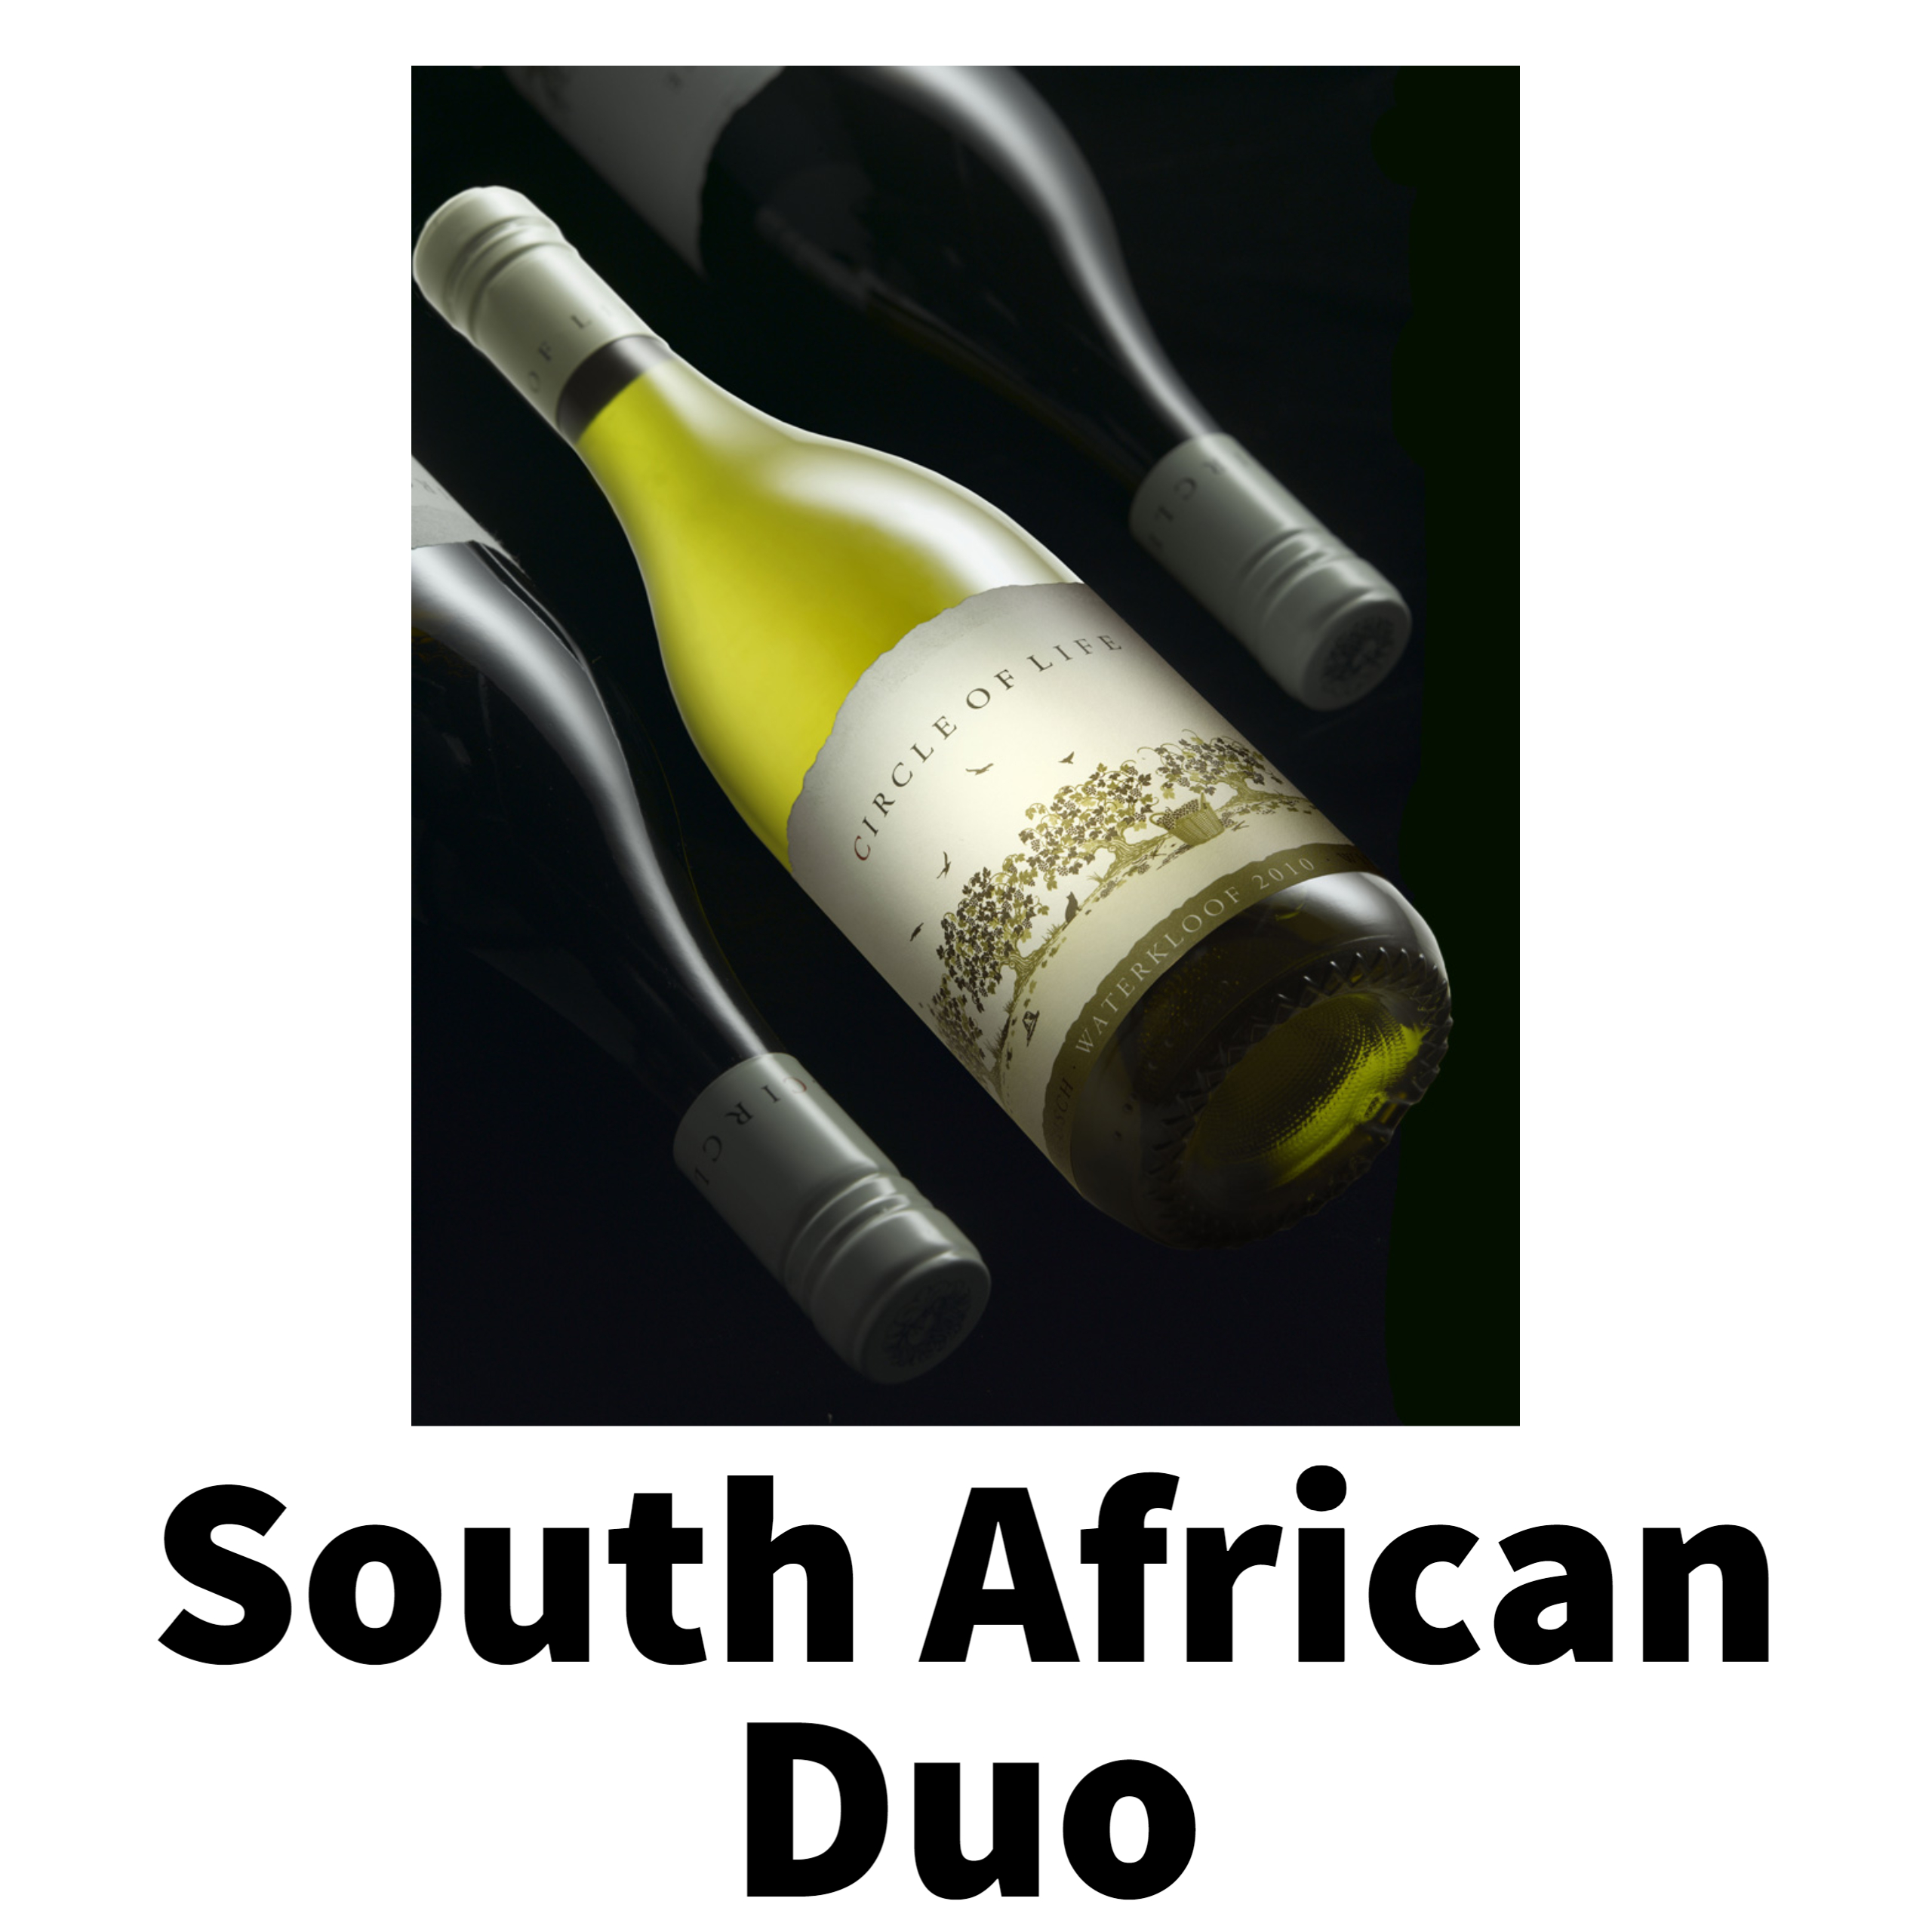 South African Duo